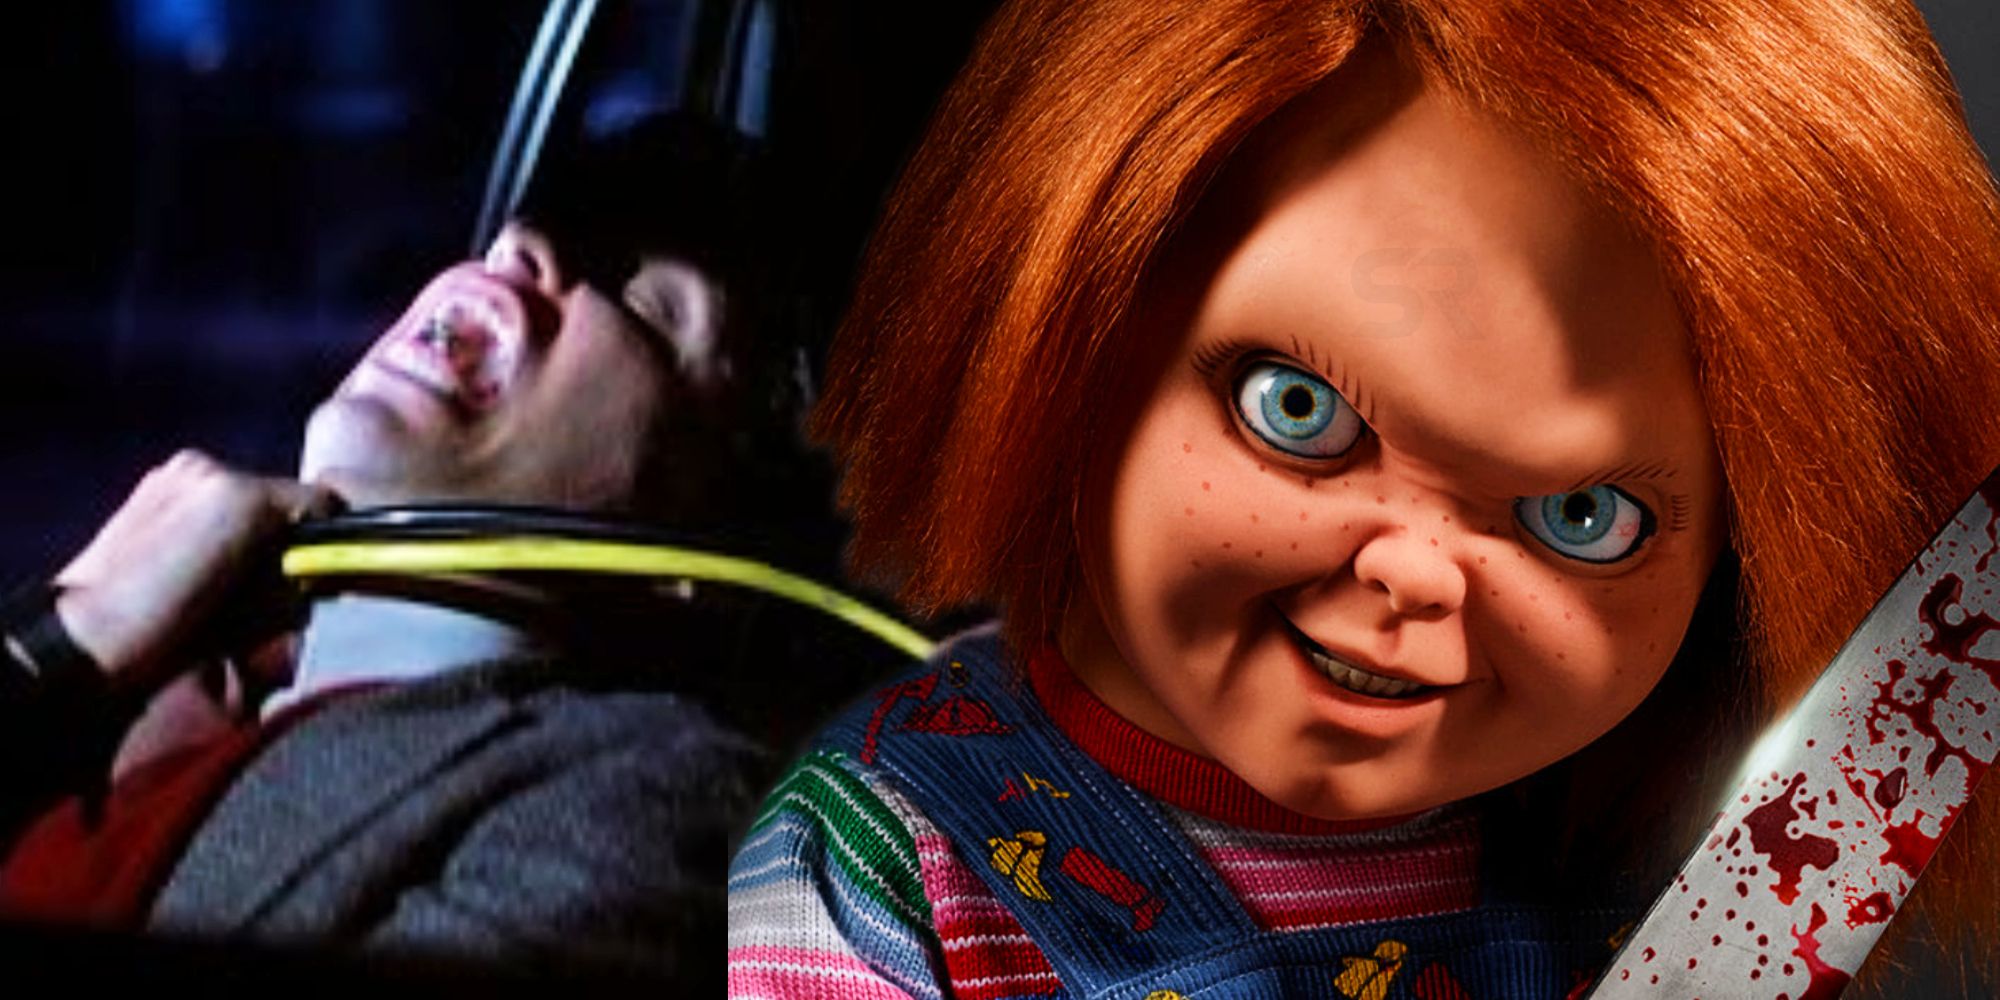 Brad Dourif as Chucky and Chris Sarandon as Mike Norris in Childs Play